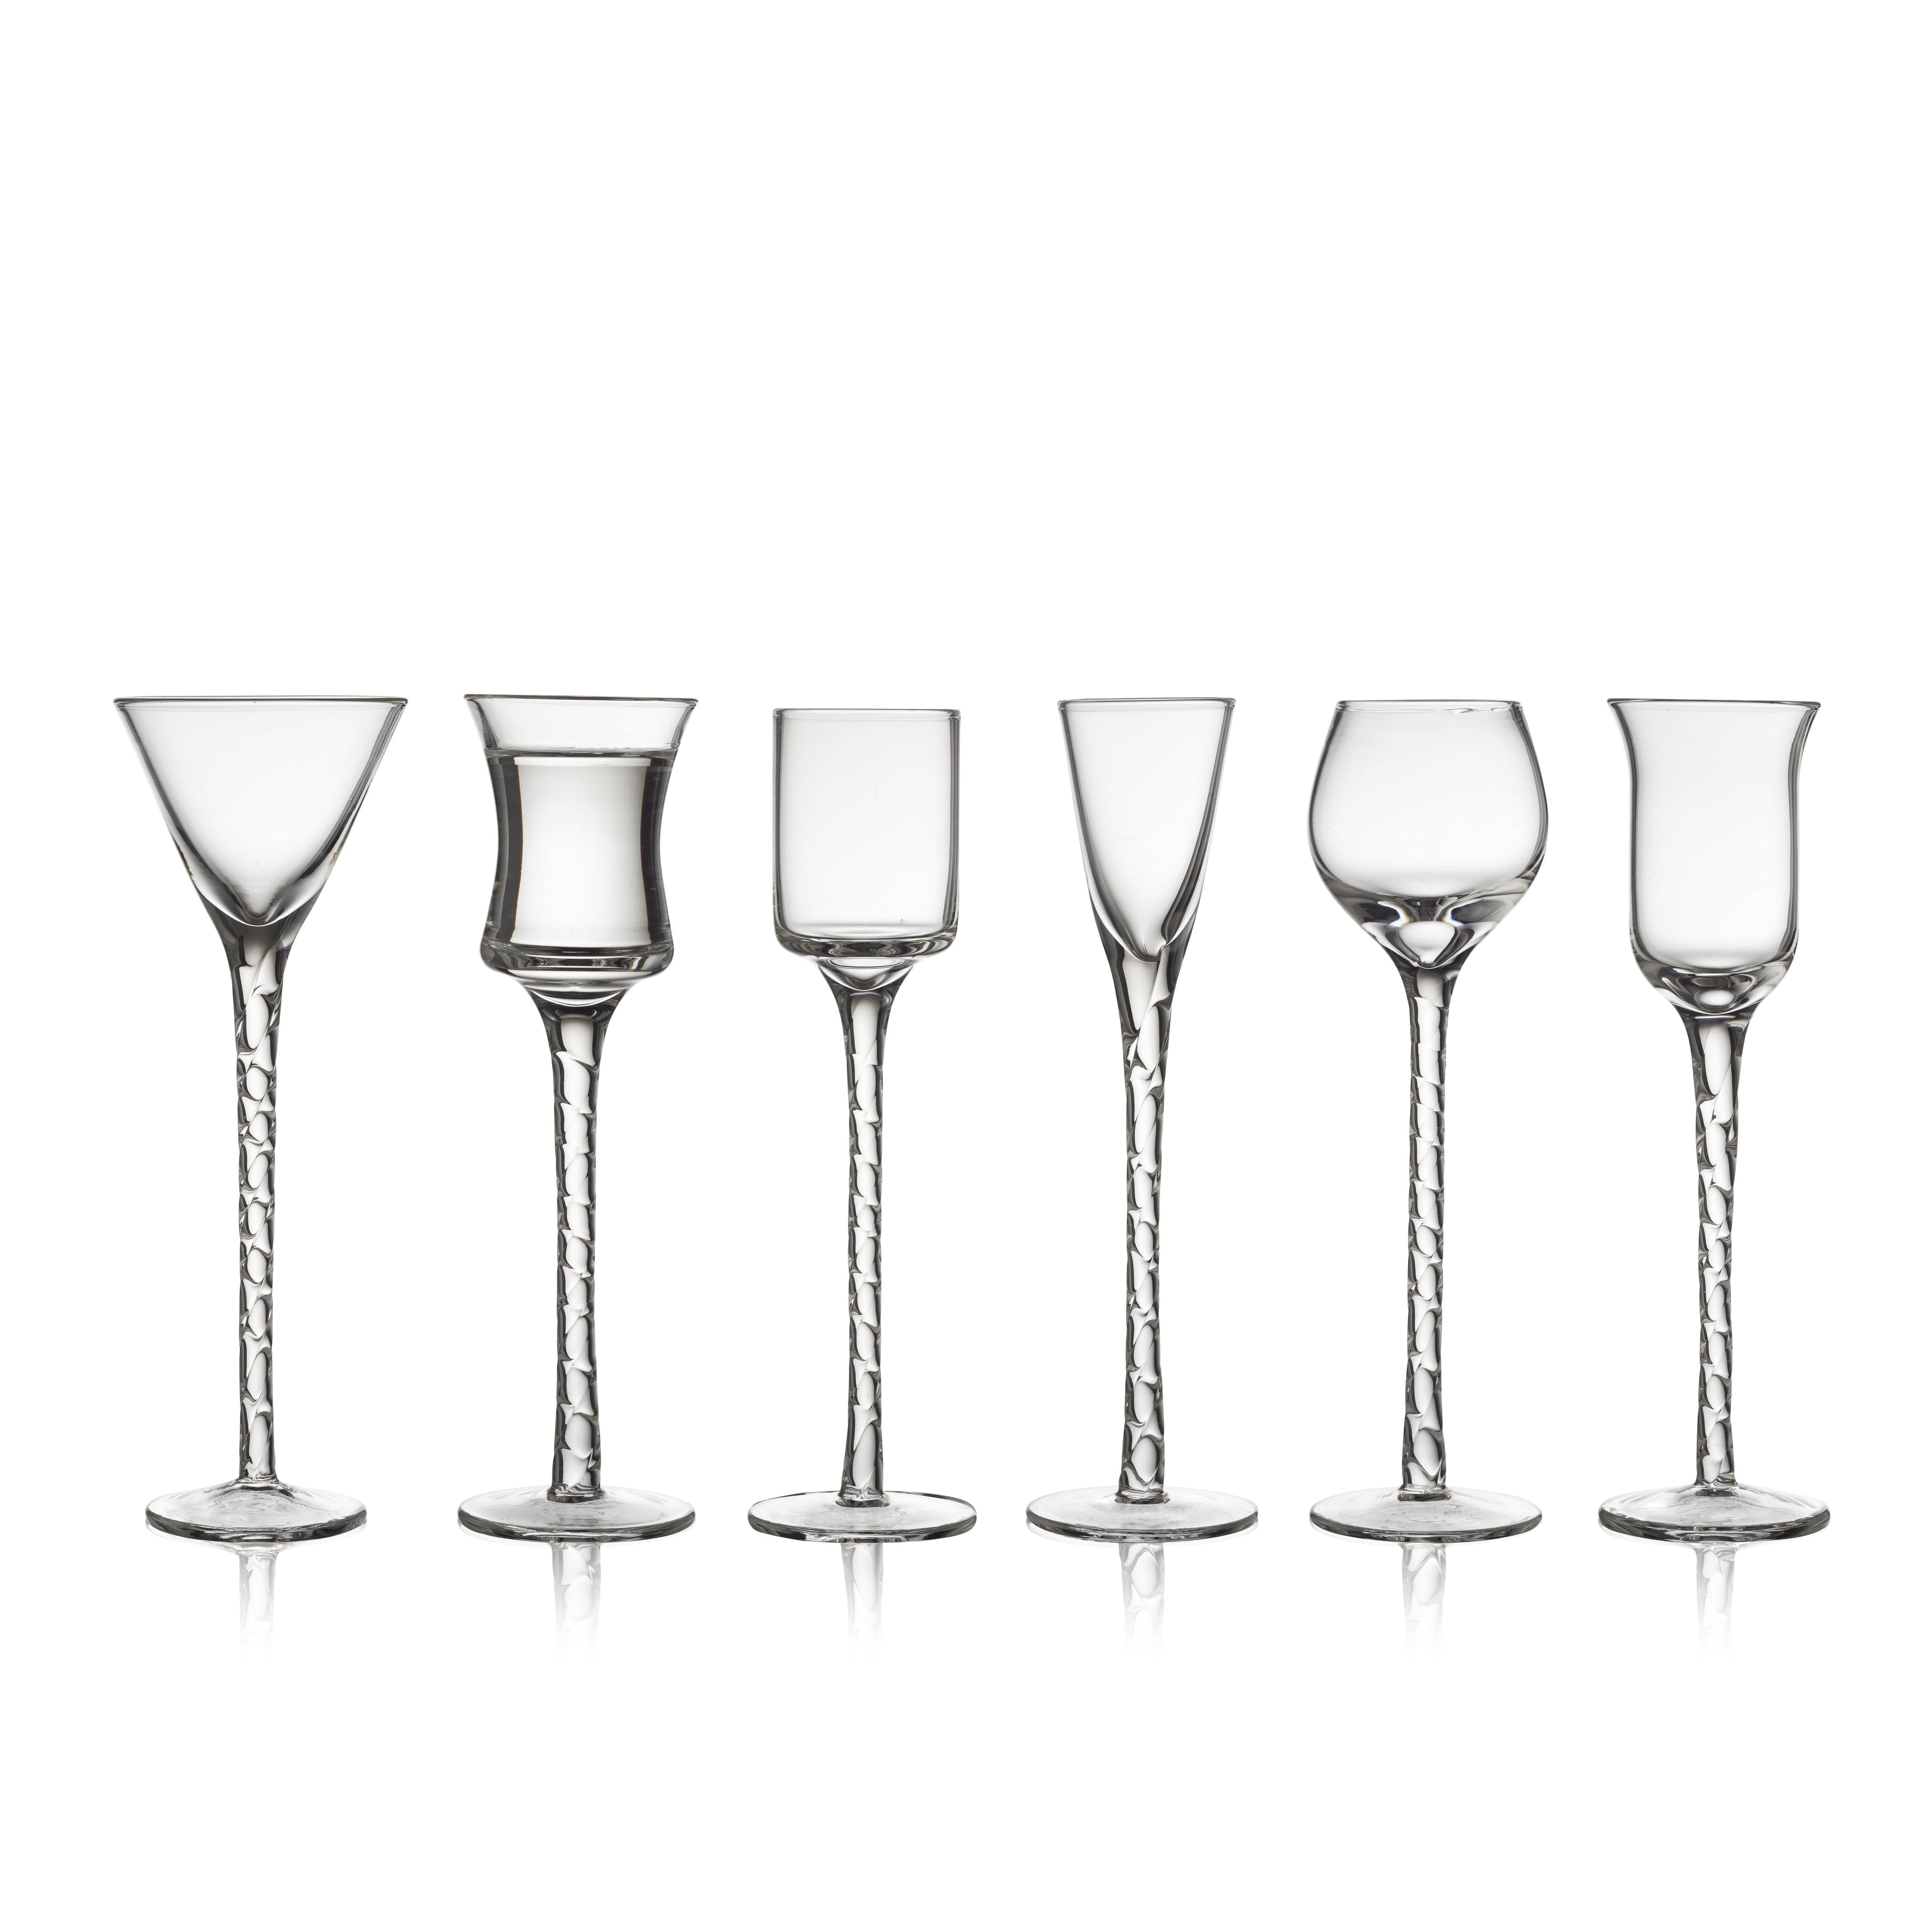 Lyngby Glas Rome Snap Glass 18 cm 6 pc's. Ass.